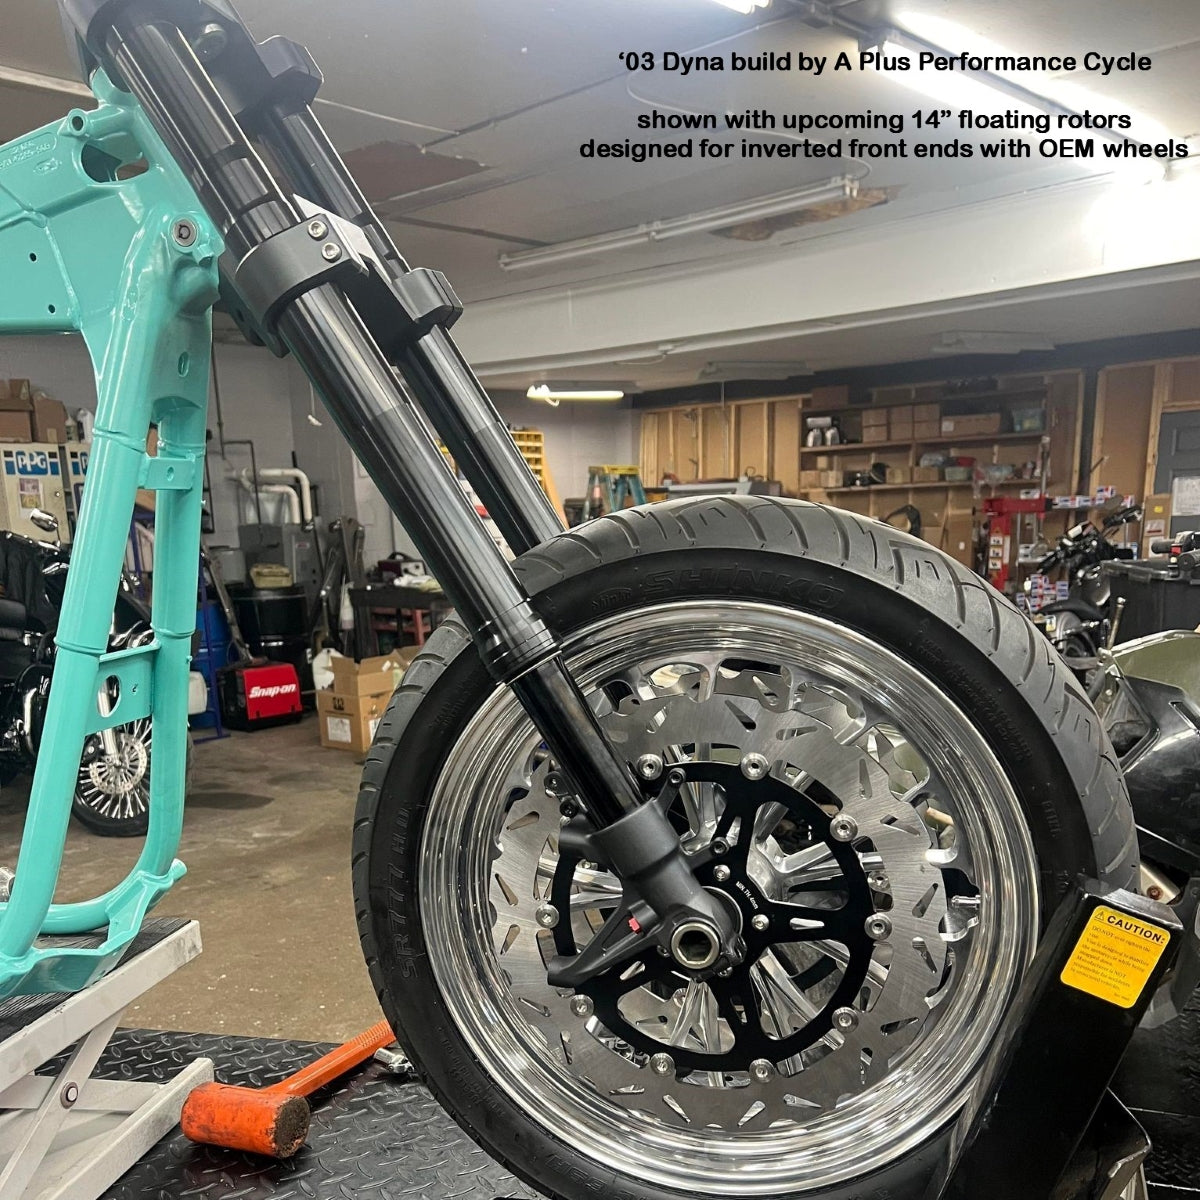 GeezerEngineering 50-54 2” drop Triple-Trees for Dyna/FXR style frames for Harley